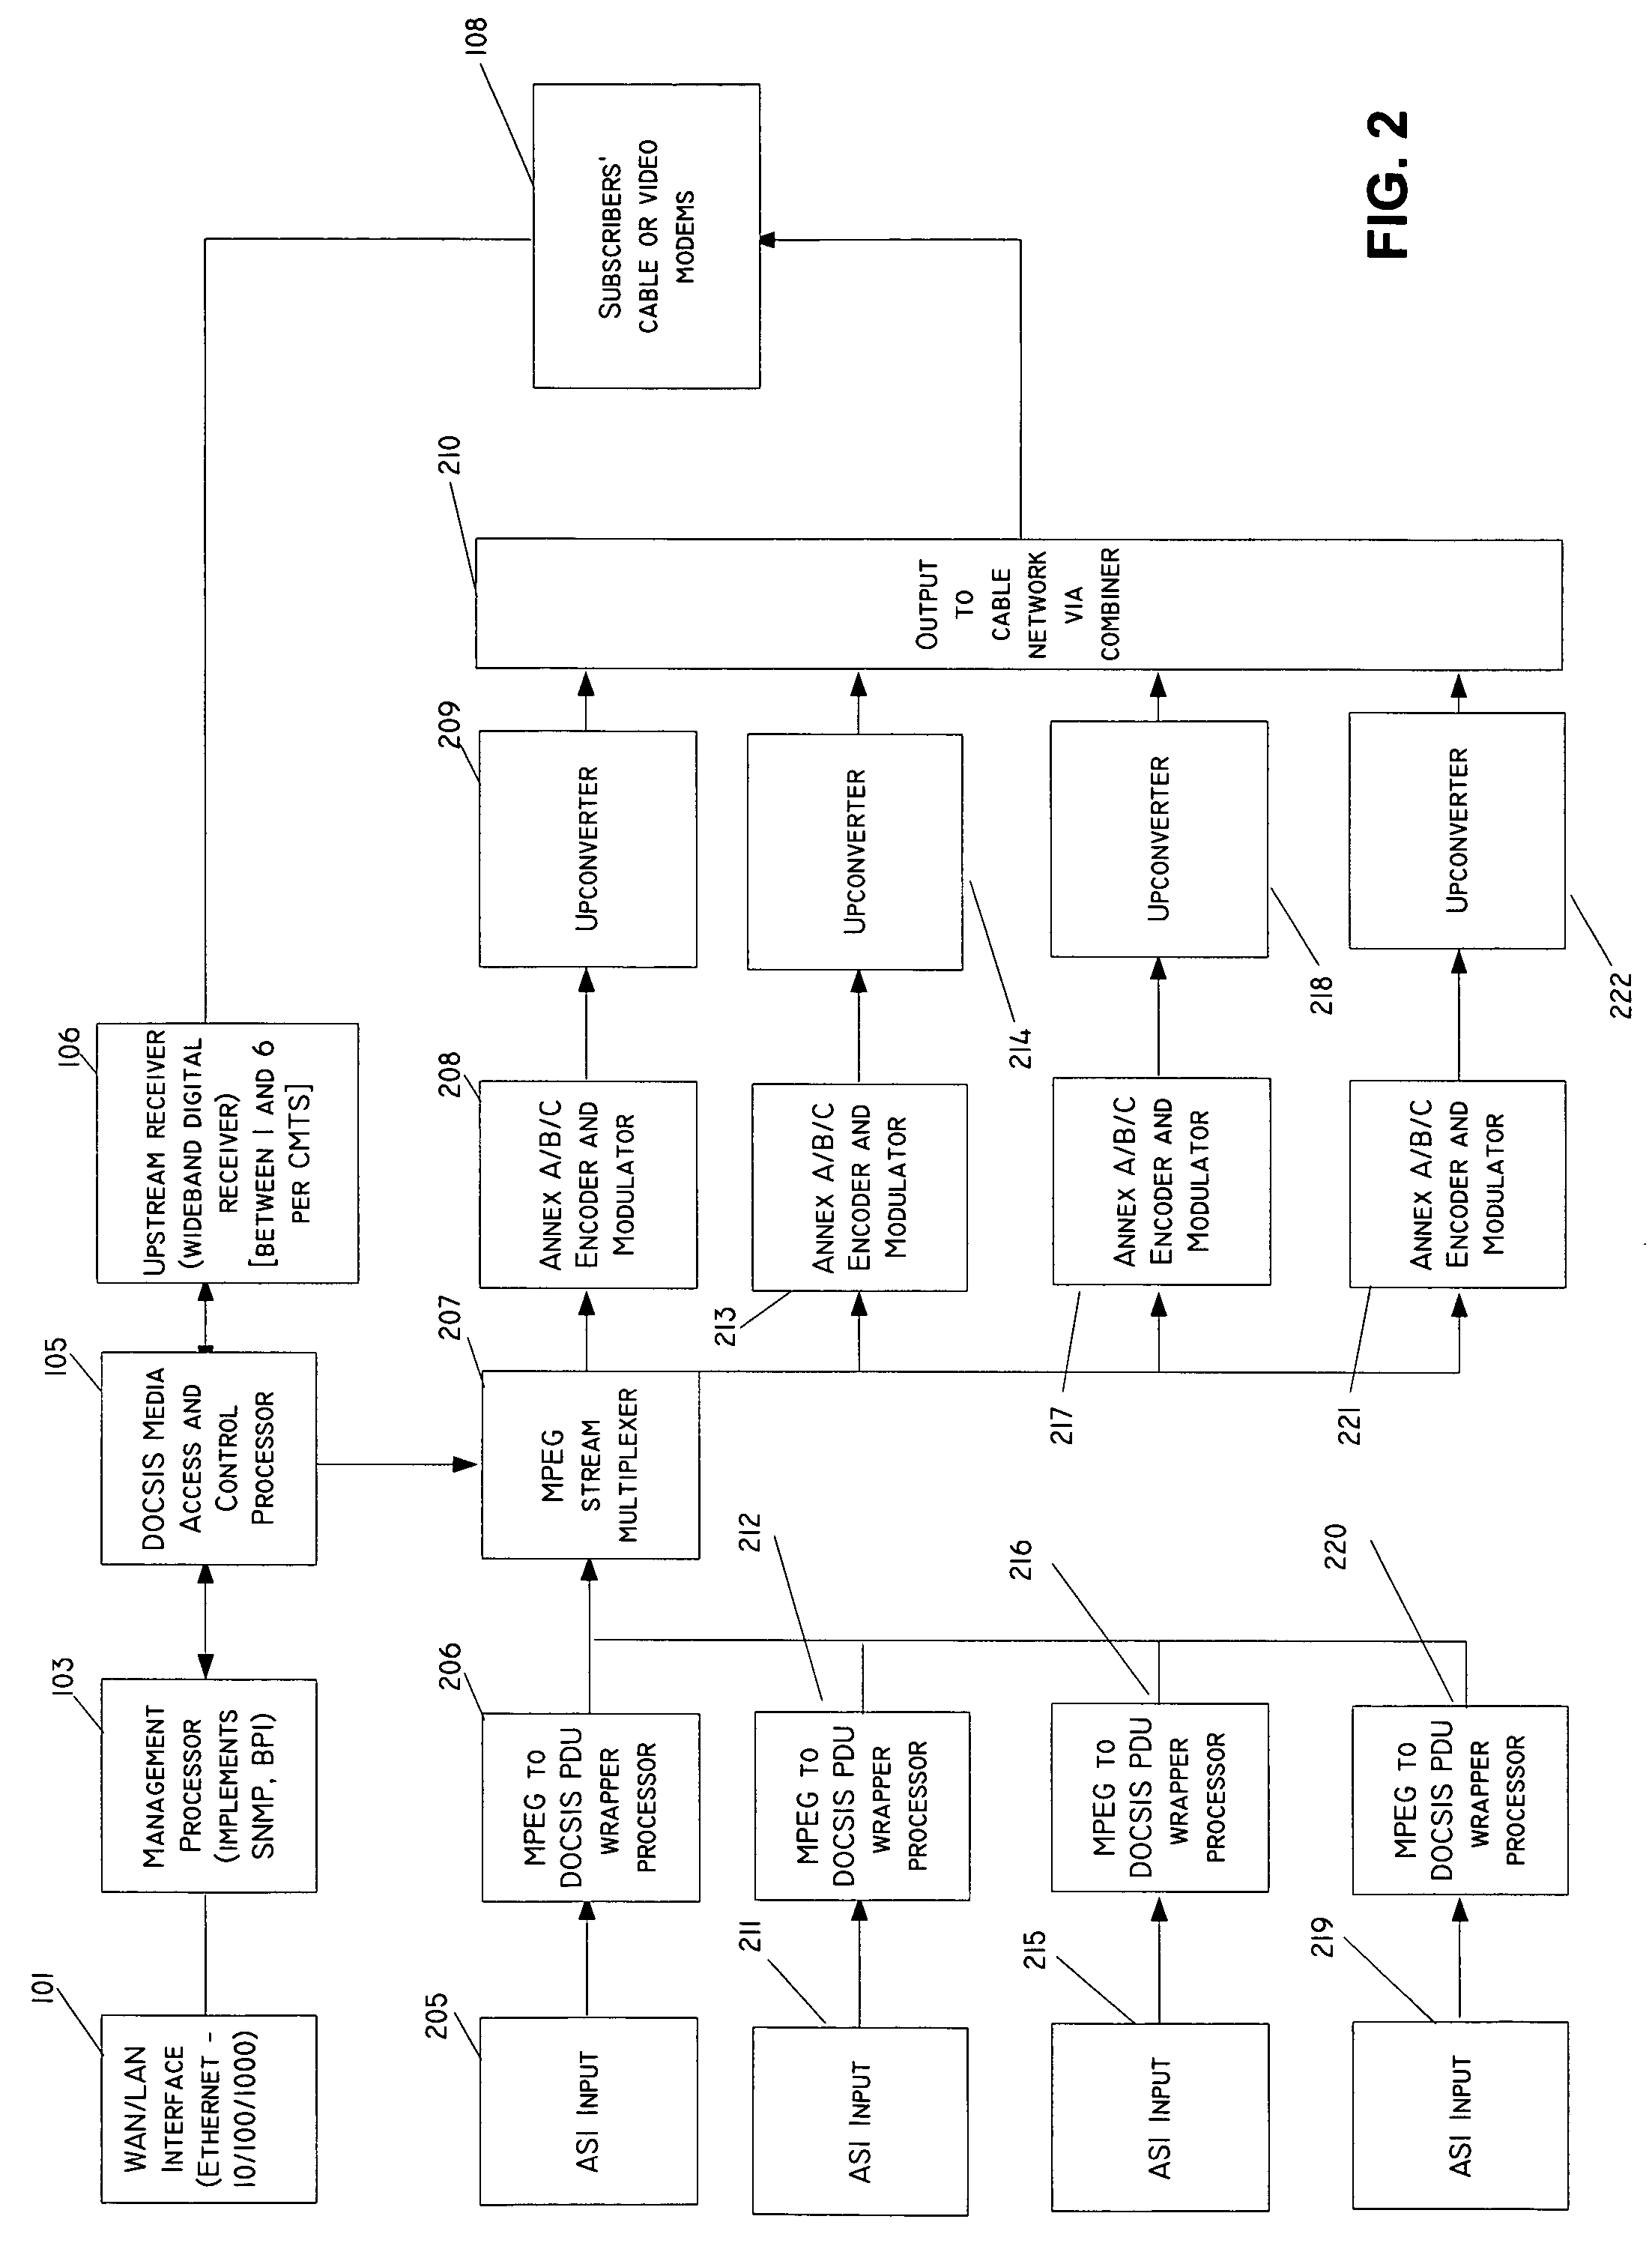 Video modem termination system and method